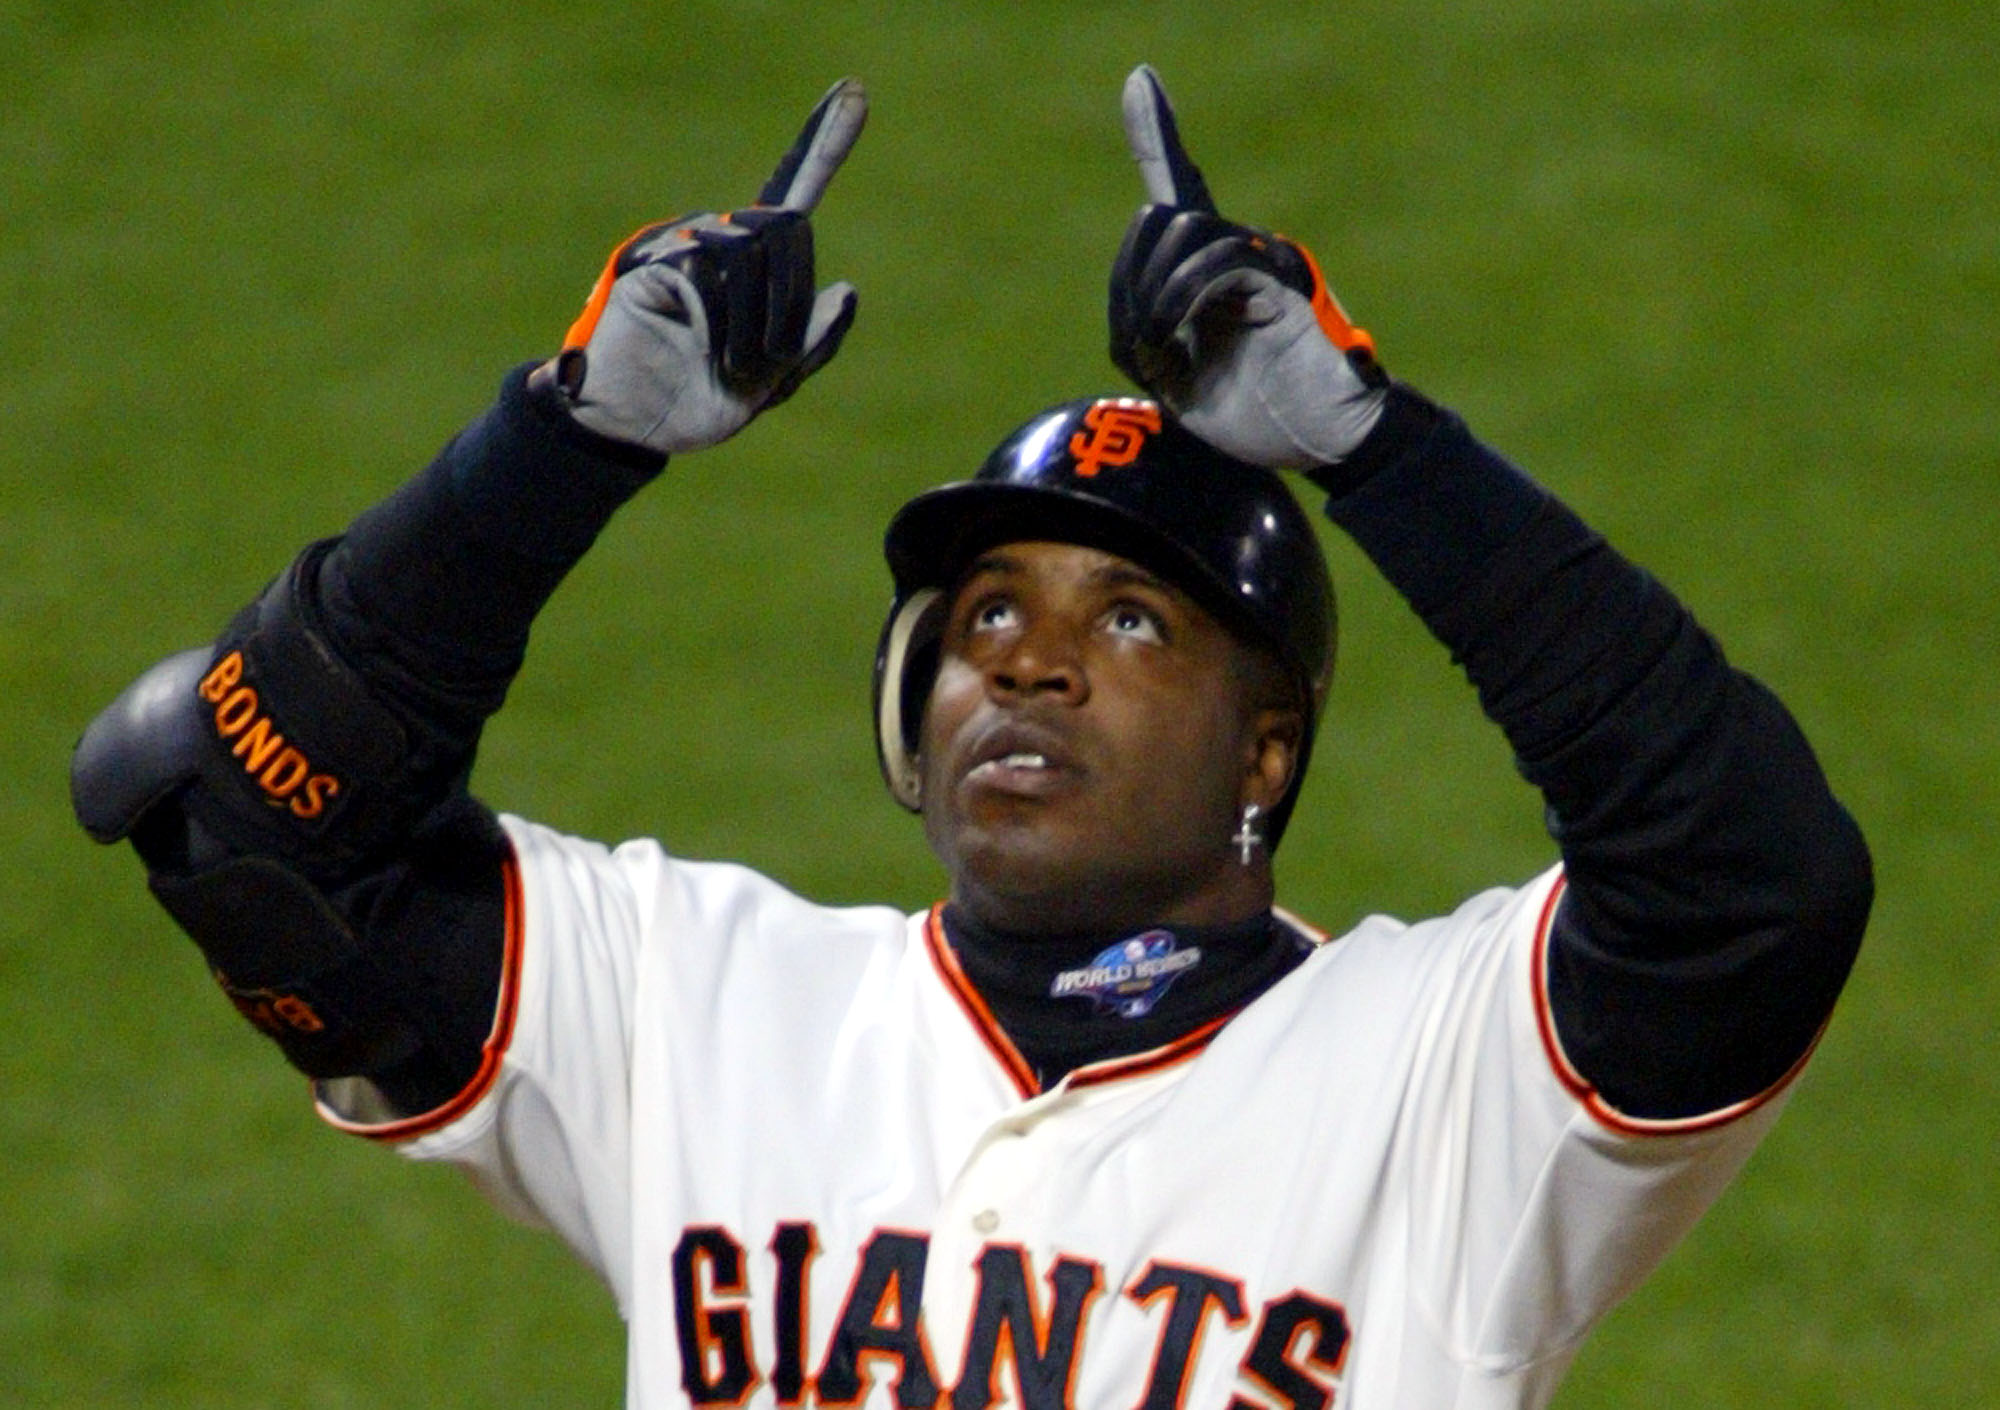 Reliving History: Barry Bonds Number 756 - Last Word On Baseball